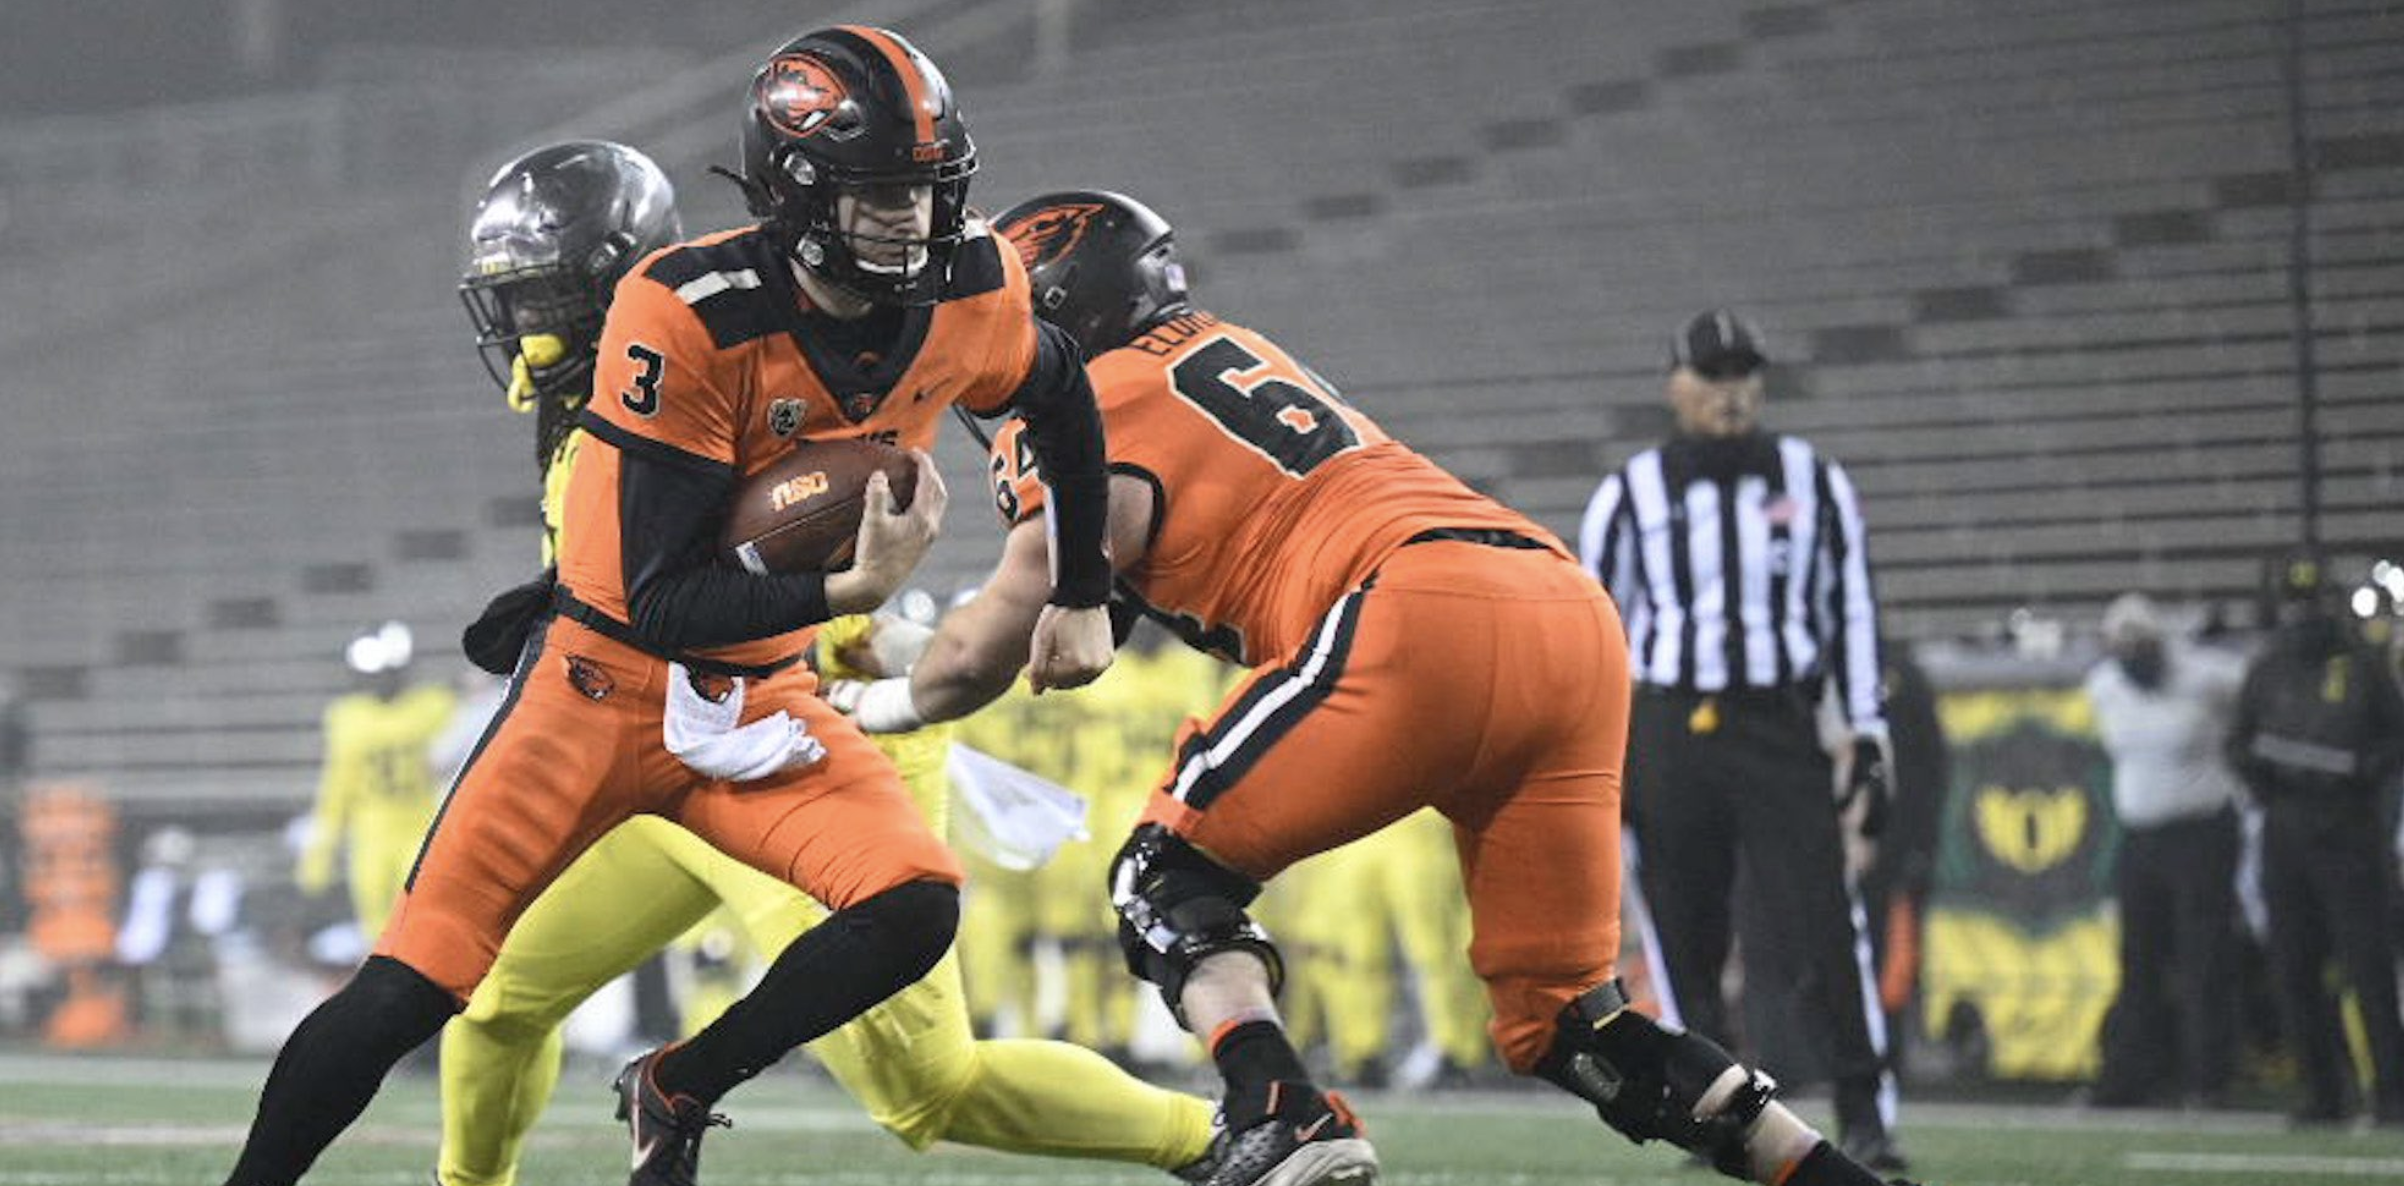 Postgame Post Mortem Takeaways from Oregon’s loss to Oregon State